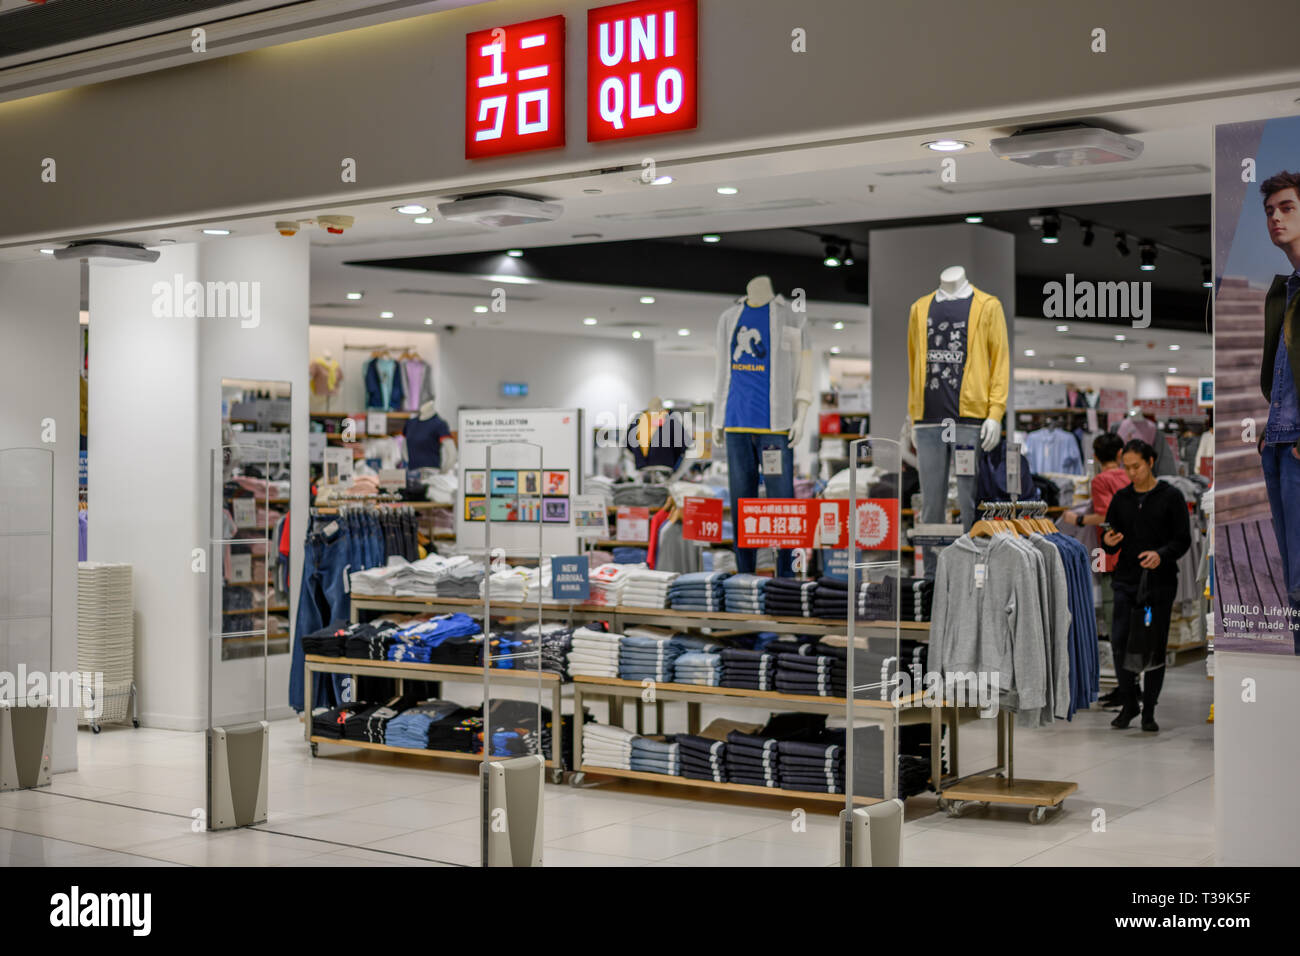 HONG KONG, China - Mar 4, 2019: Uniqlo clothing store in Hong Kong. Uniqlo  is a Japanese fashion store famous for its fast fashion and affordable clot  Stock Photo - Alamy